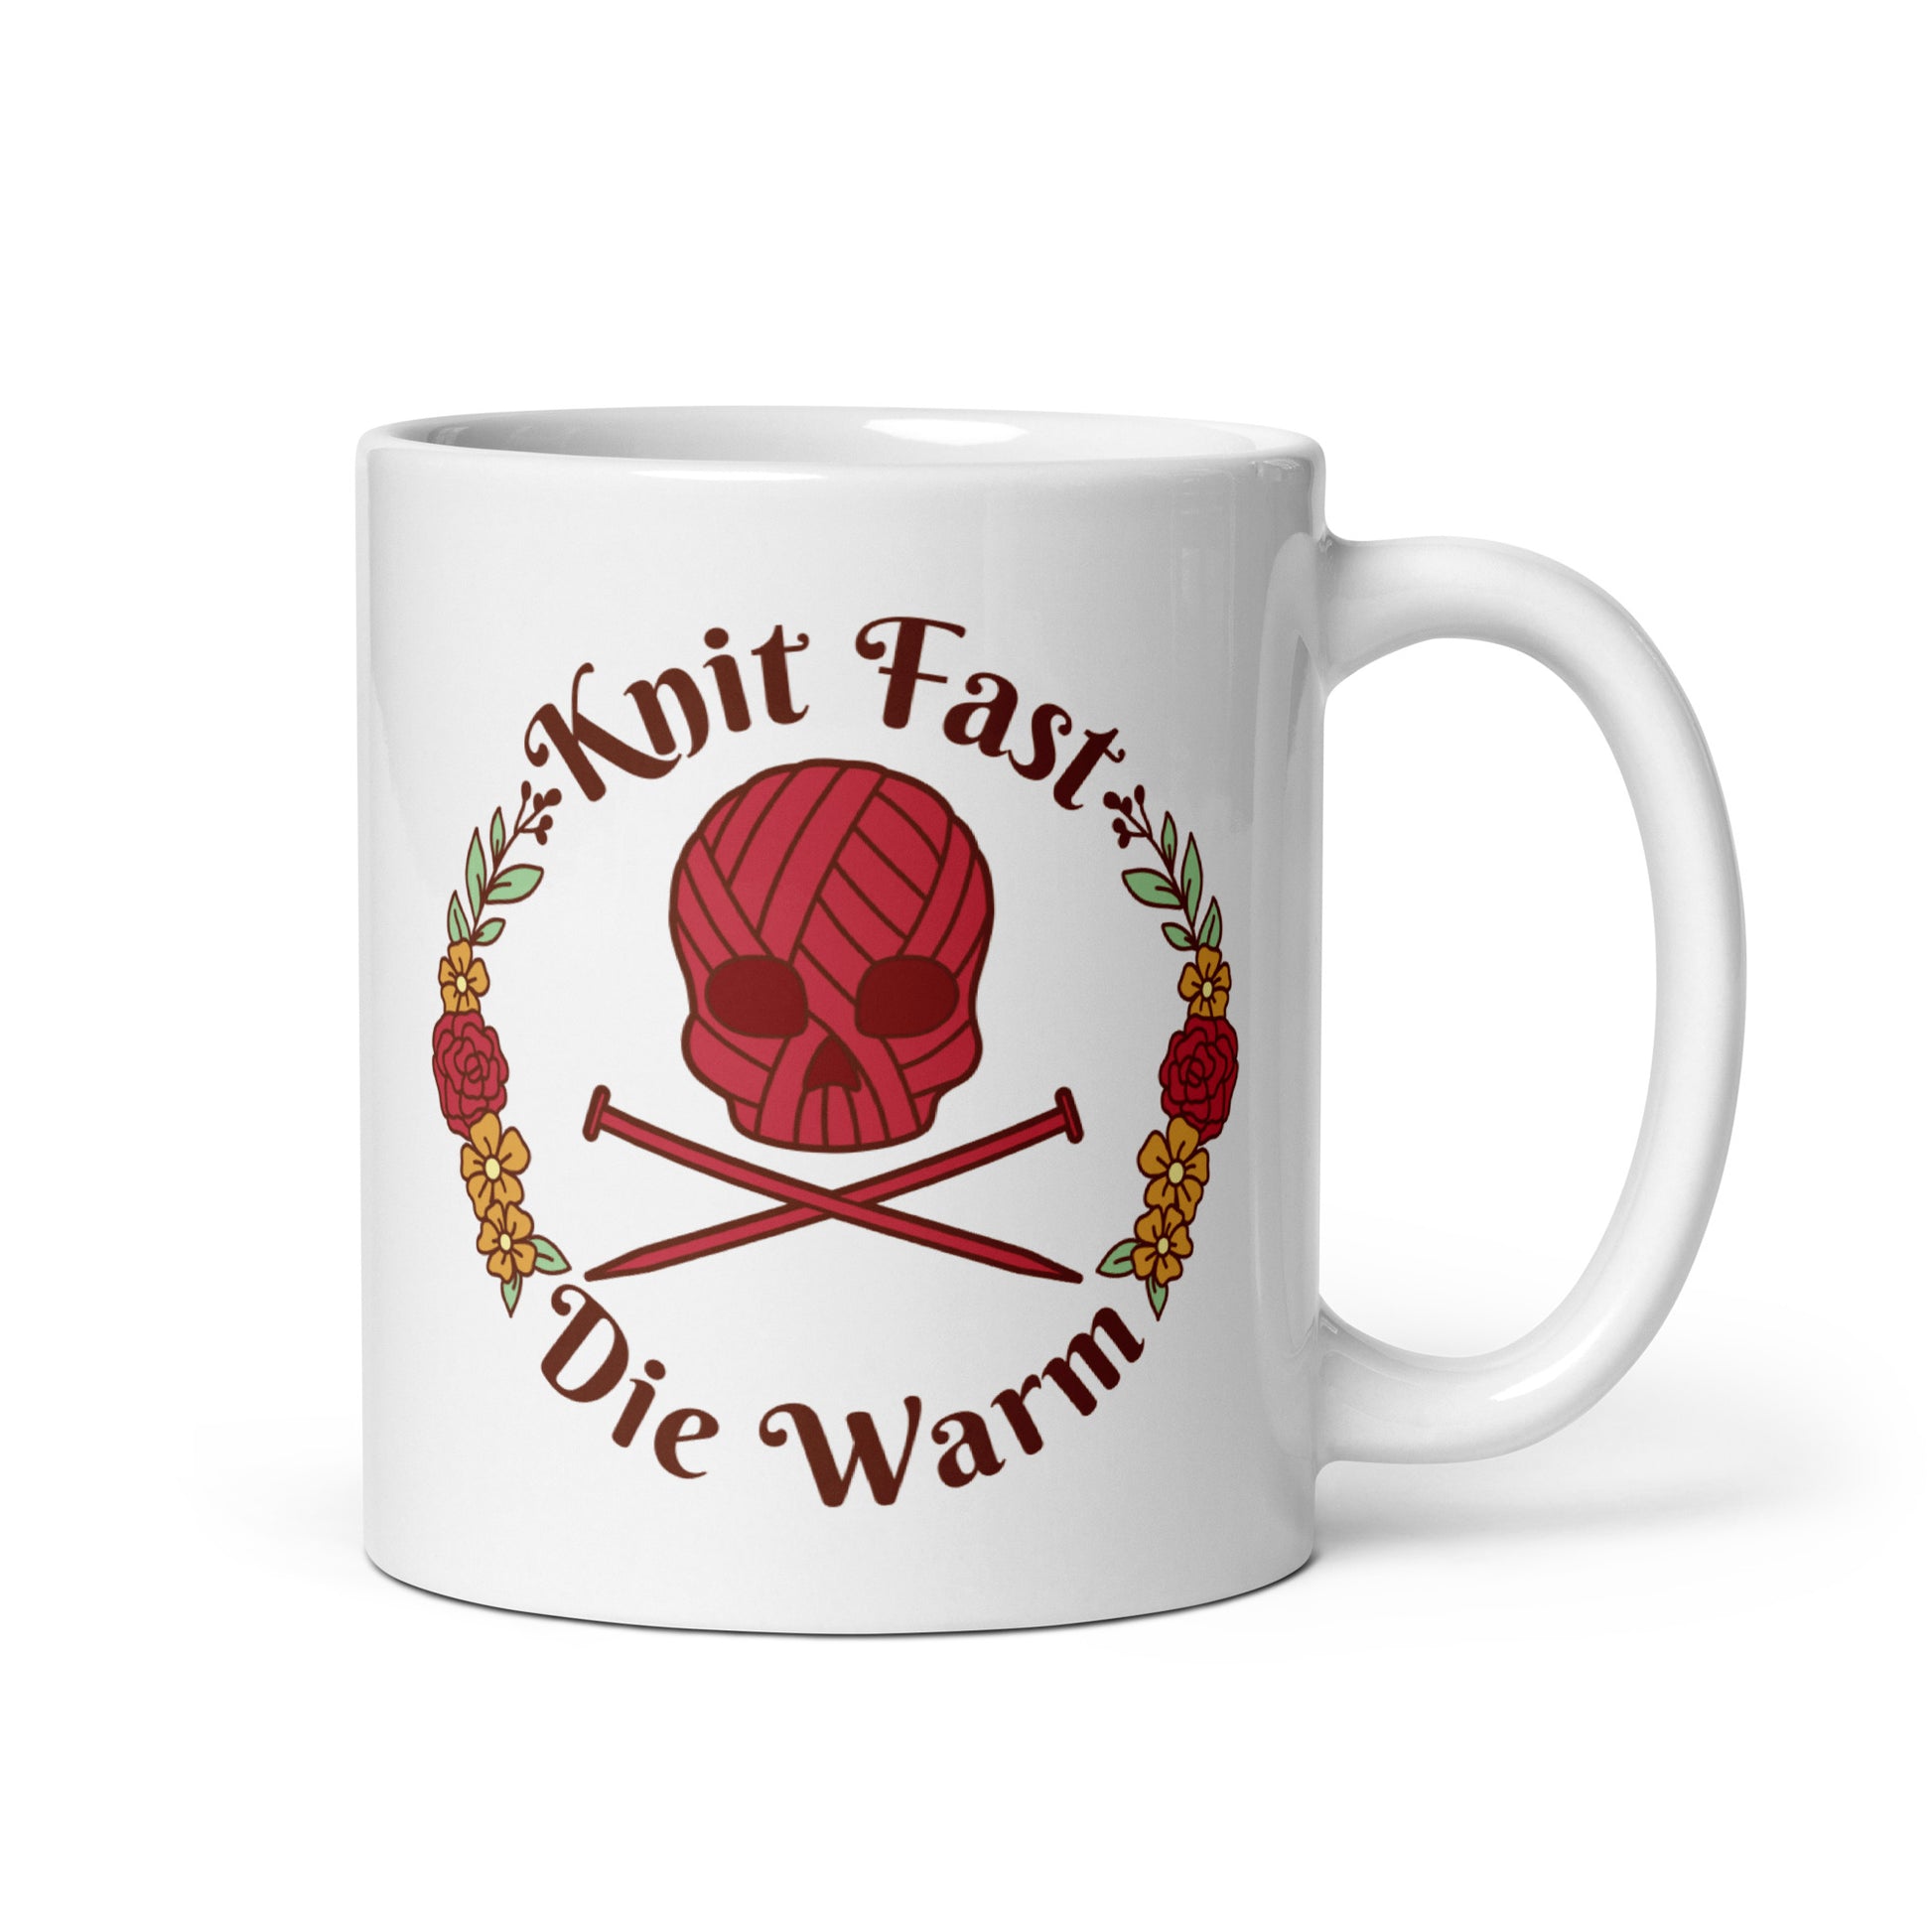 A white 11 ounce mug featuring an image of a red skull and crossbones made of yarn and knitting needles. A floral wreath surrounds the skull, along with words that read "Knit Fast, Die Warm"